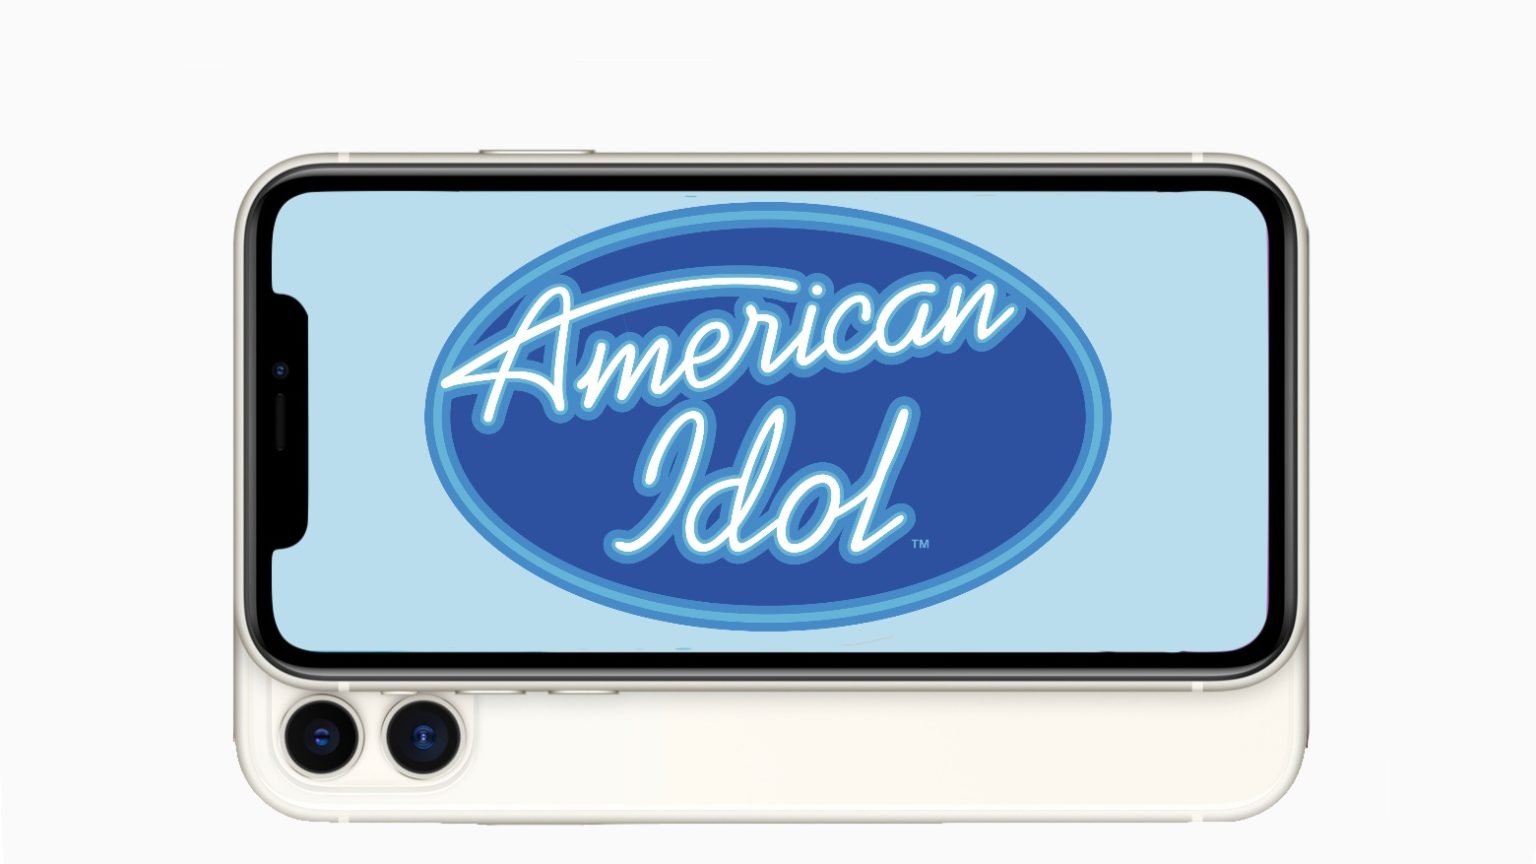 “American Idol” is sacred with iPhone